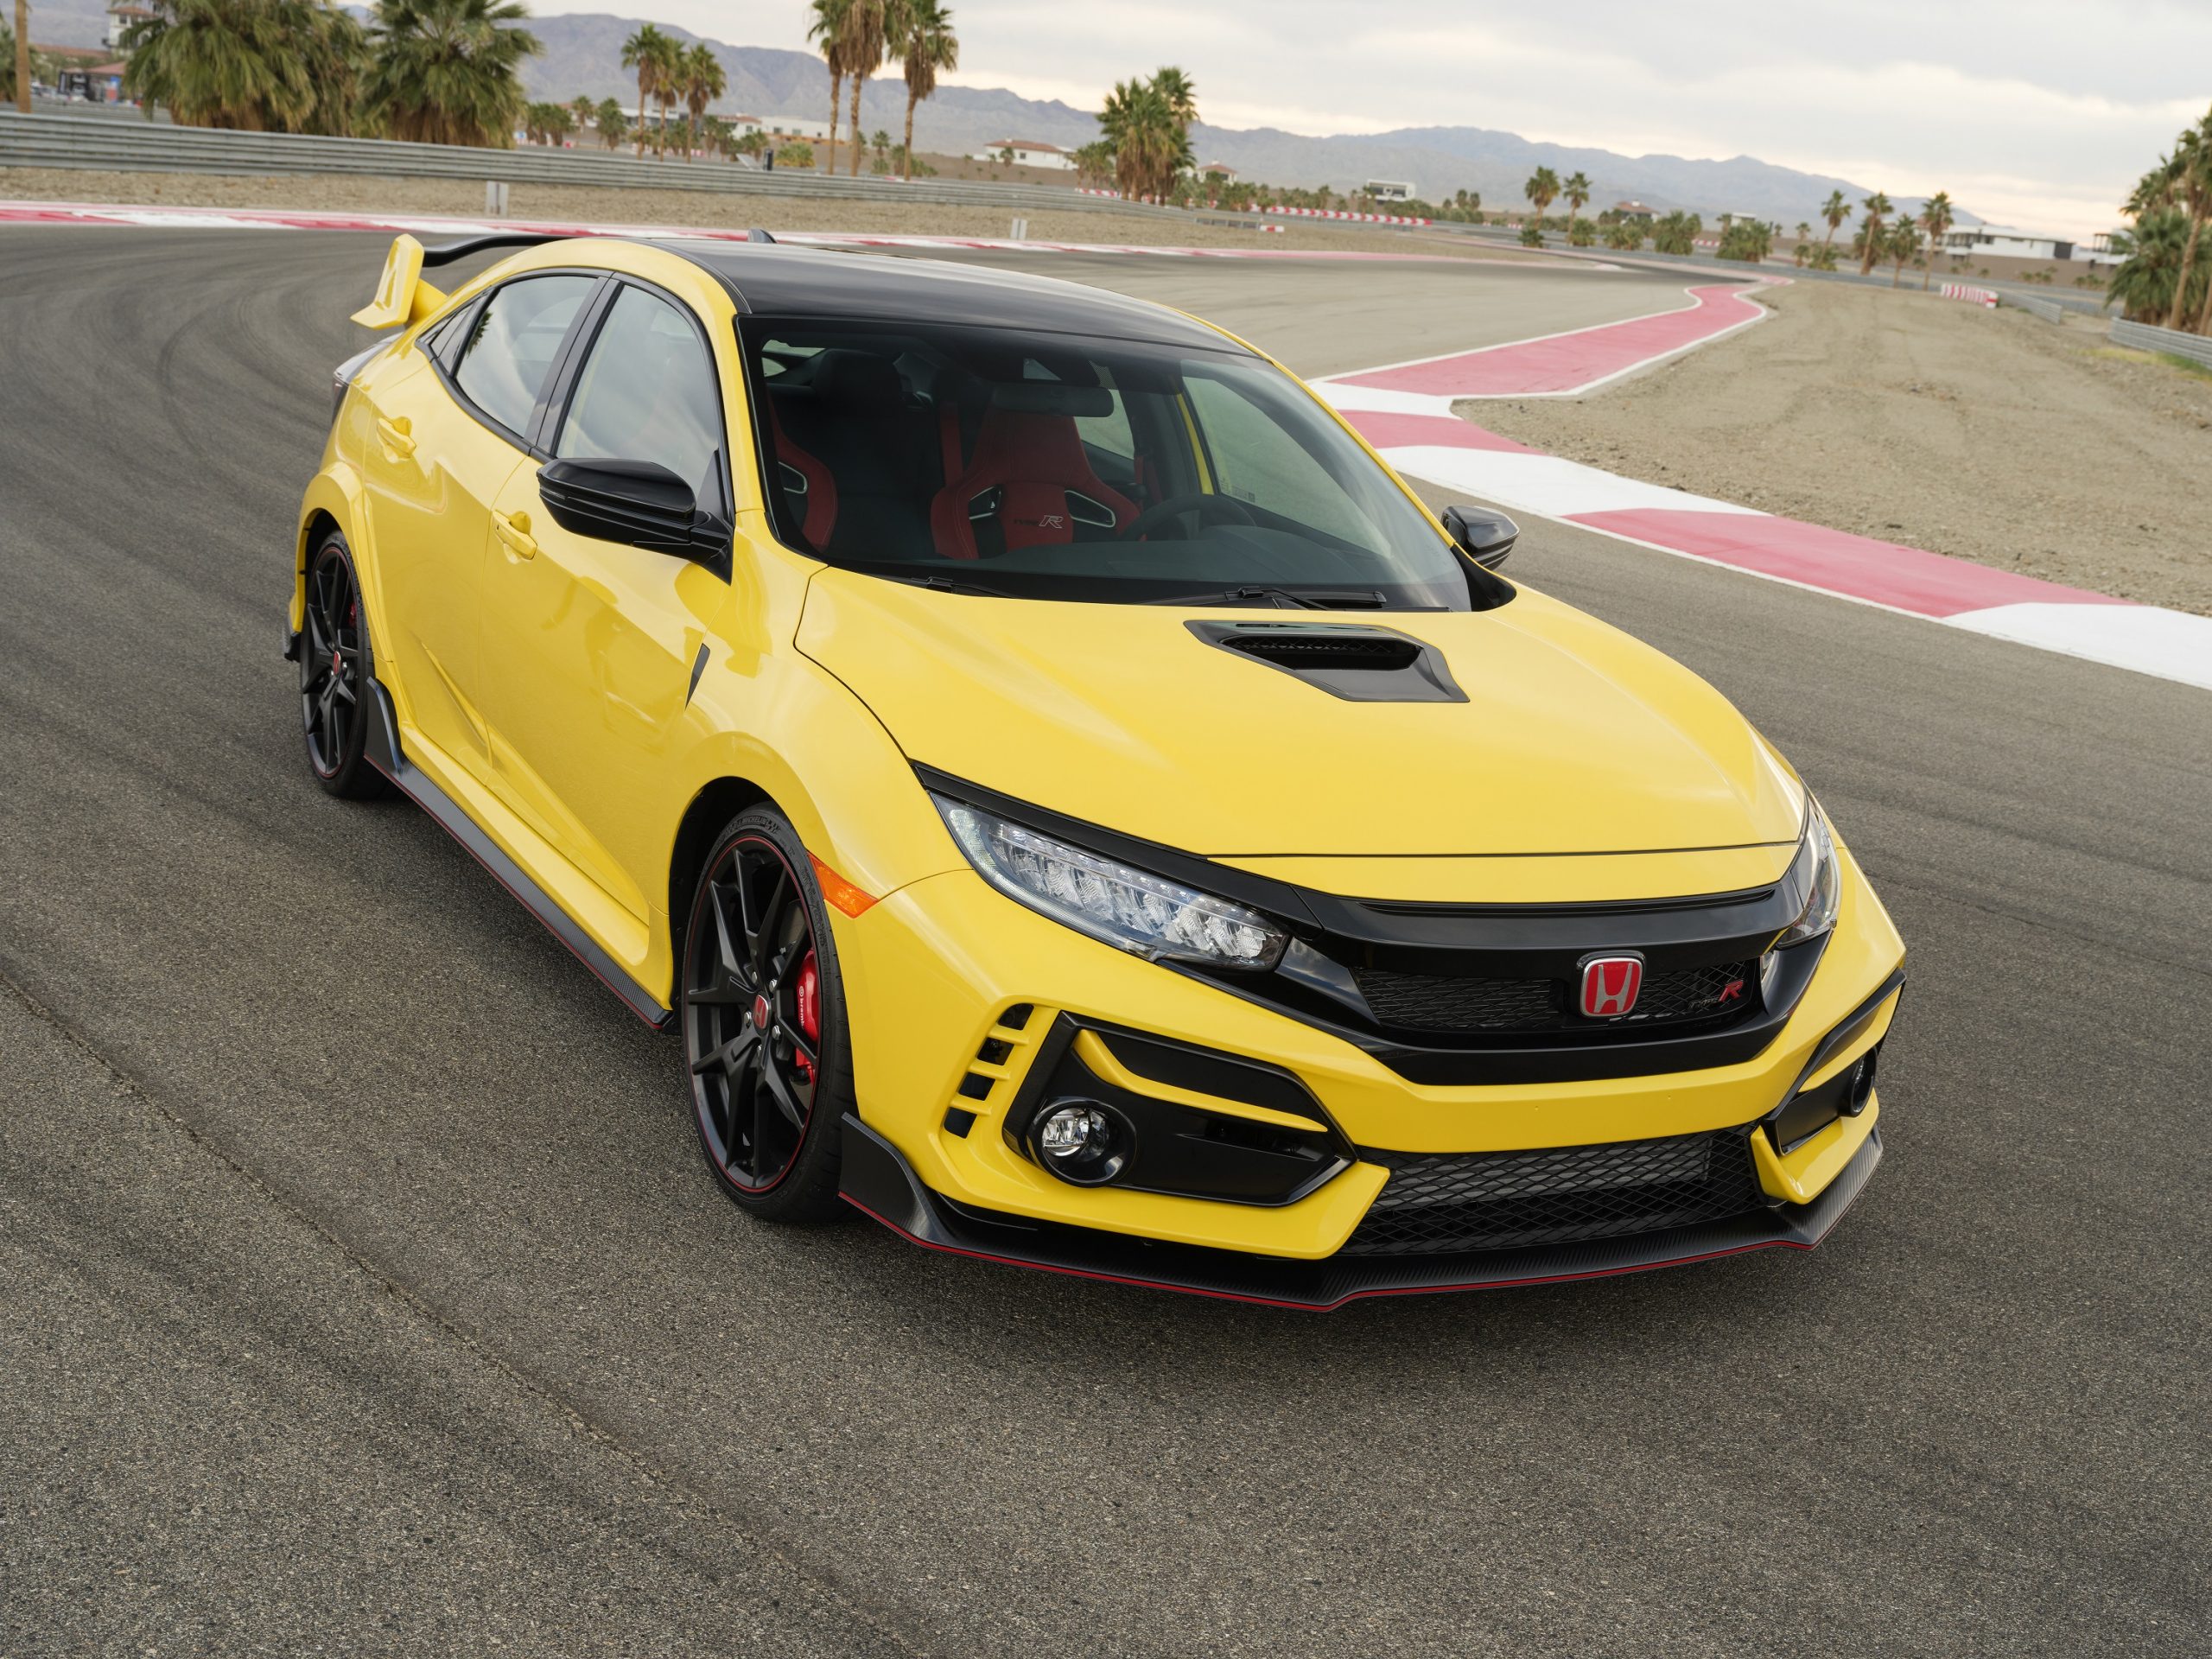 A yellow Honda Civic Type R with one of the worst car trends: fake vents, photographed on a race track